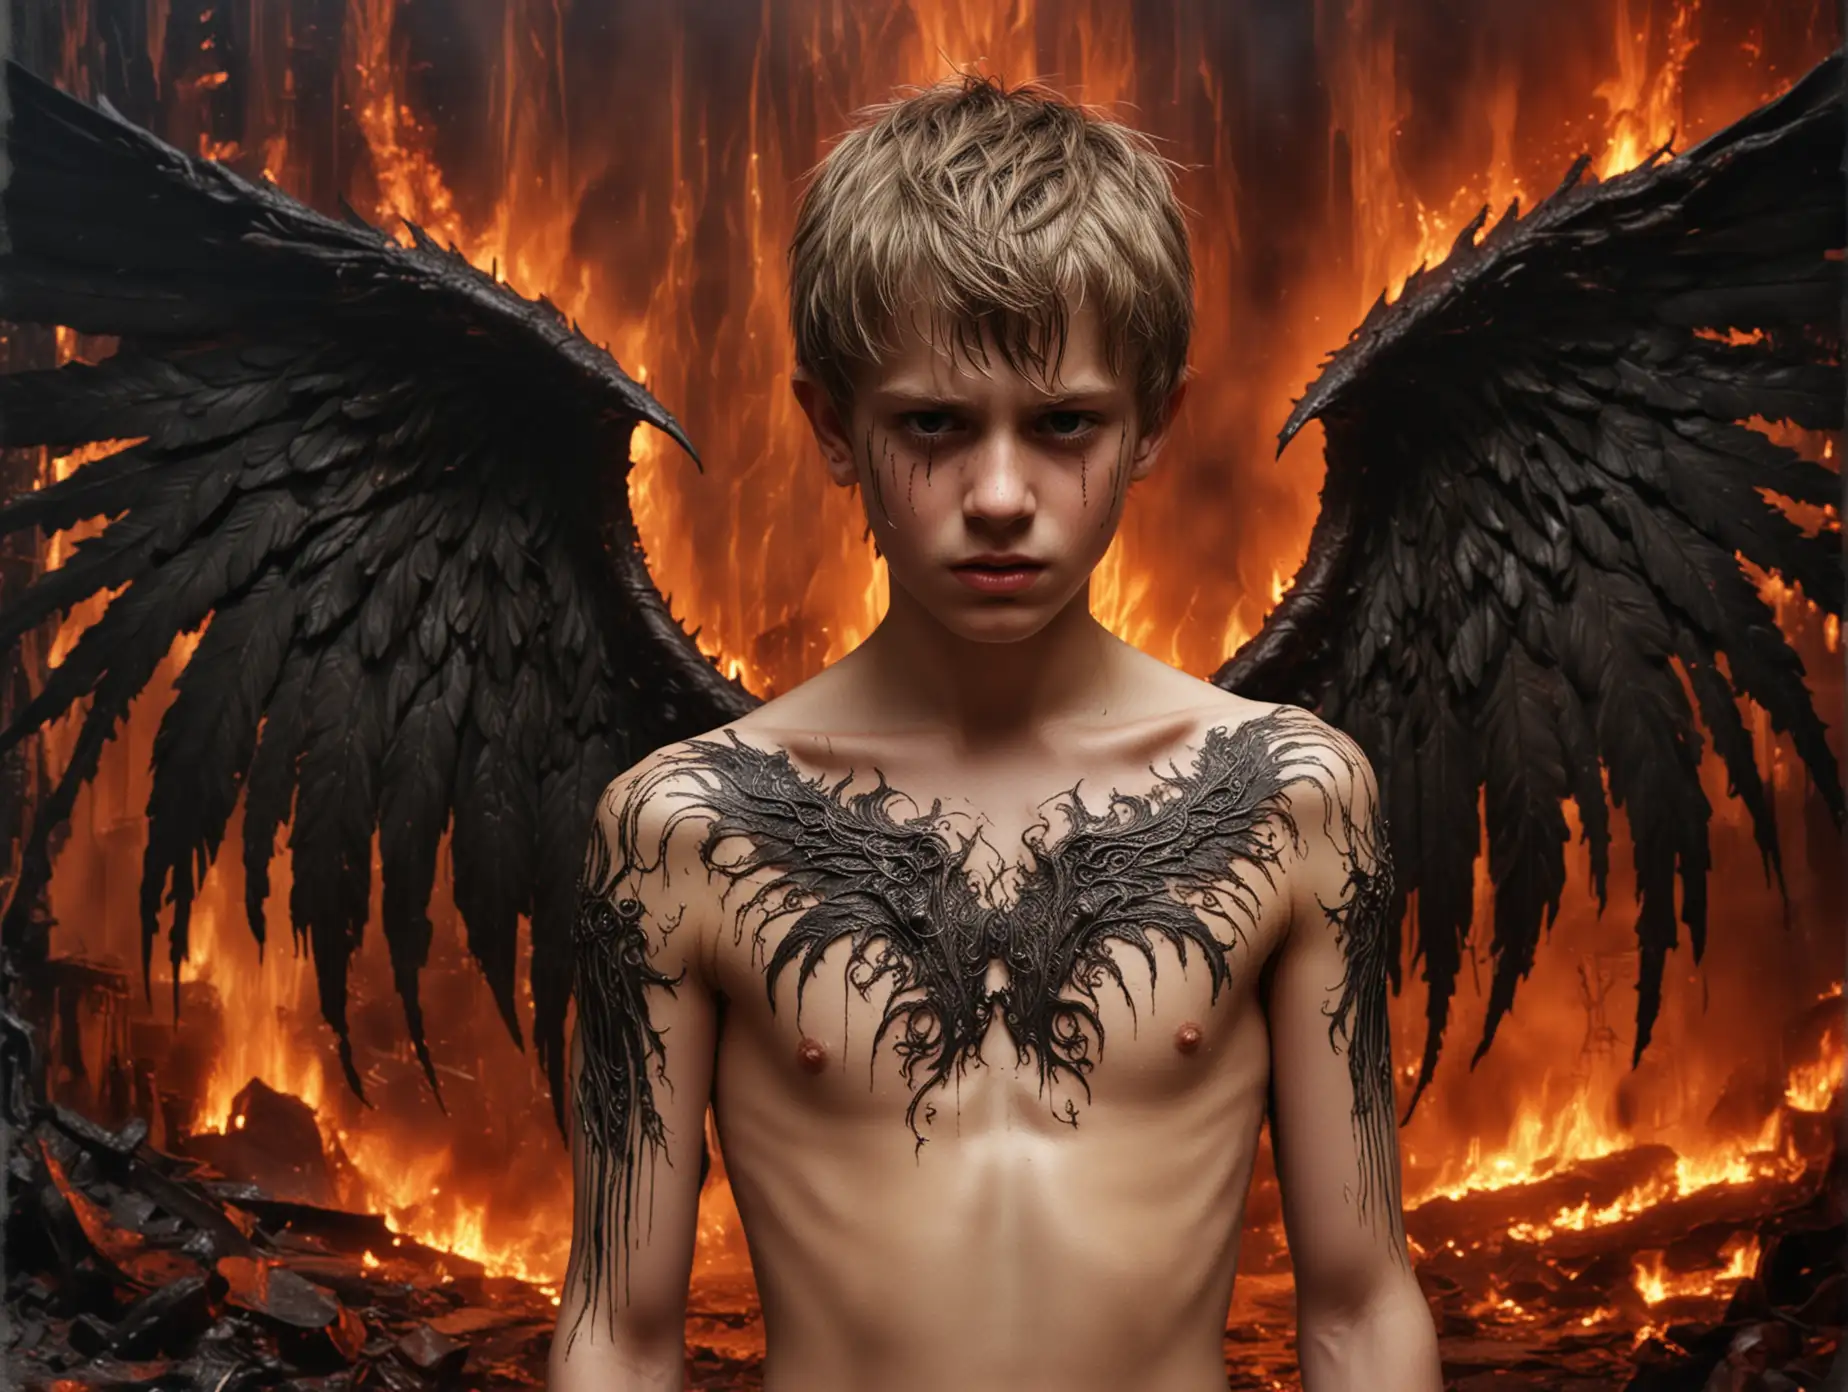 filigree!!
almost naked crying boy 14 years old with demonic webbed leather wings, pain, suffering,
realistic, beautiful, in the background is the fiery abyss of hell.